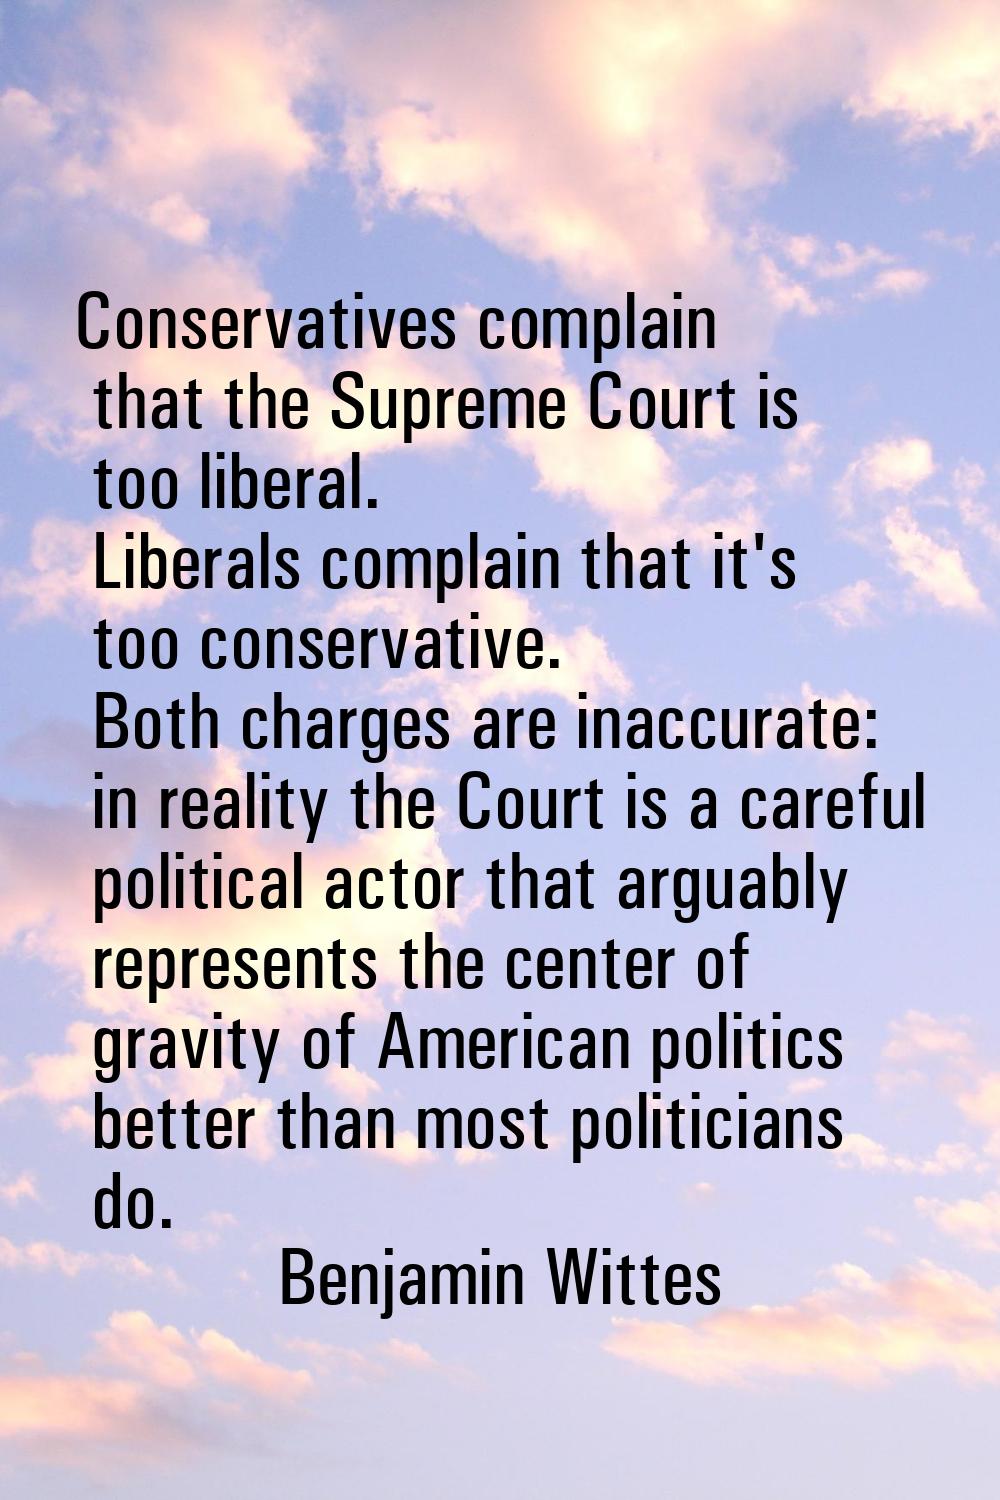 Conservatives complain that the Supreme Court is too liberal. Liberals complain that it's too conse